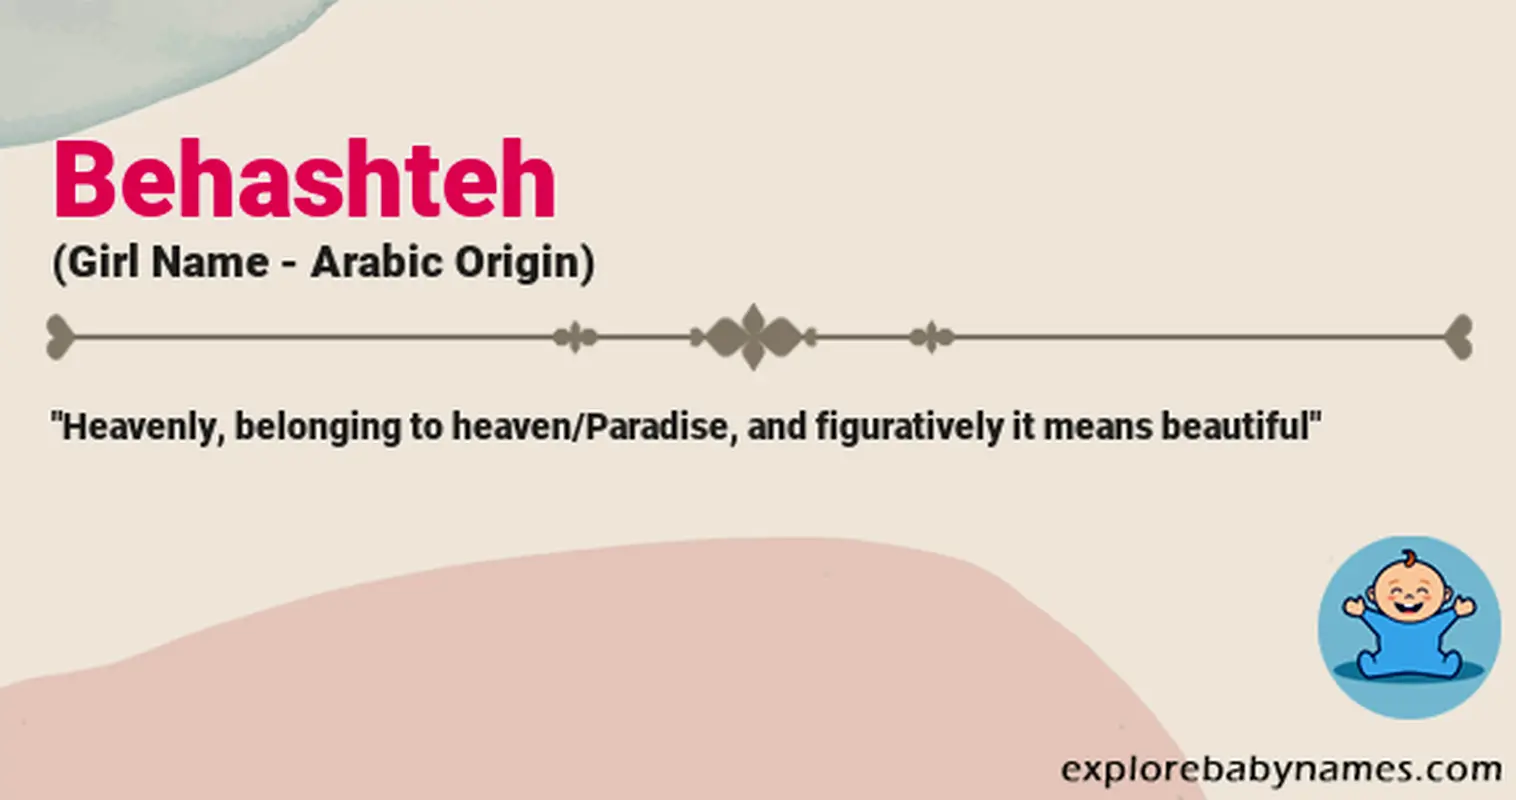 Meaning of Behashteh